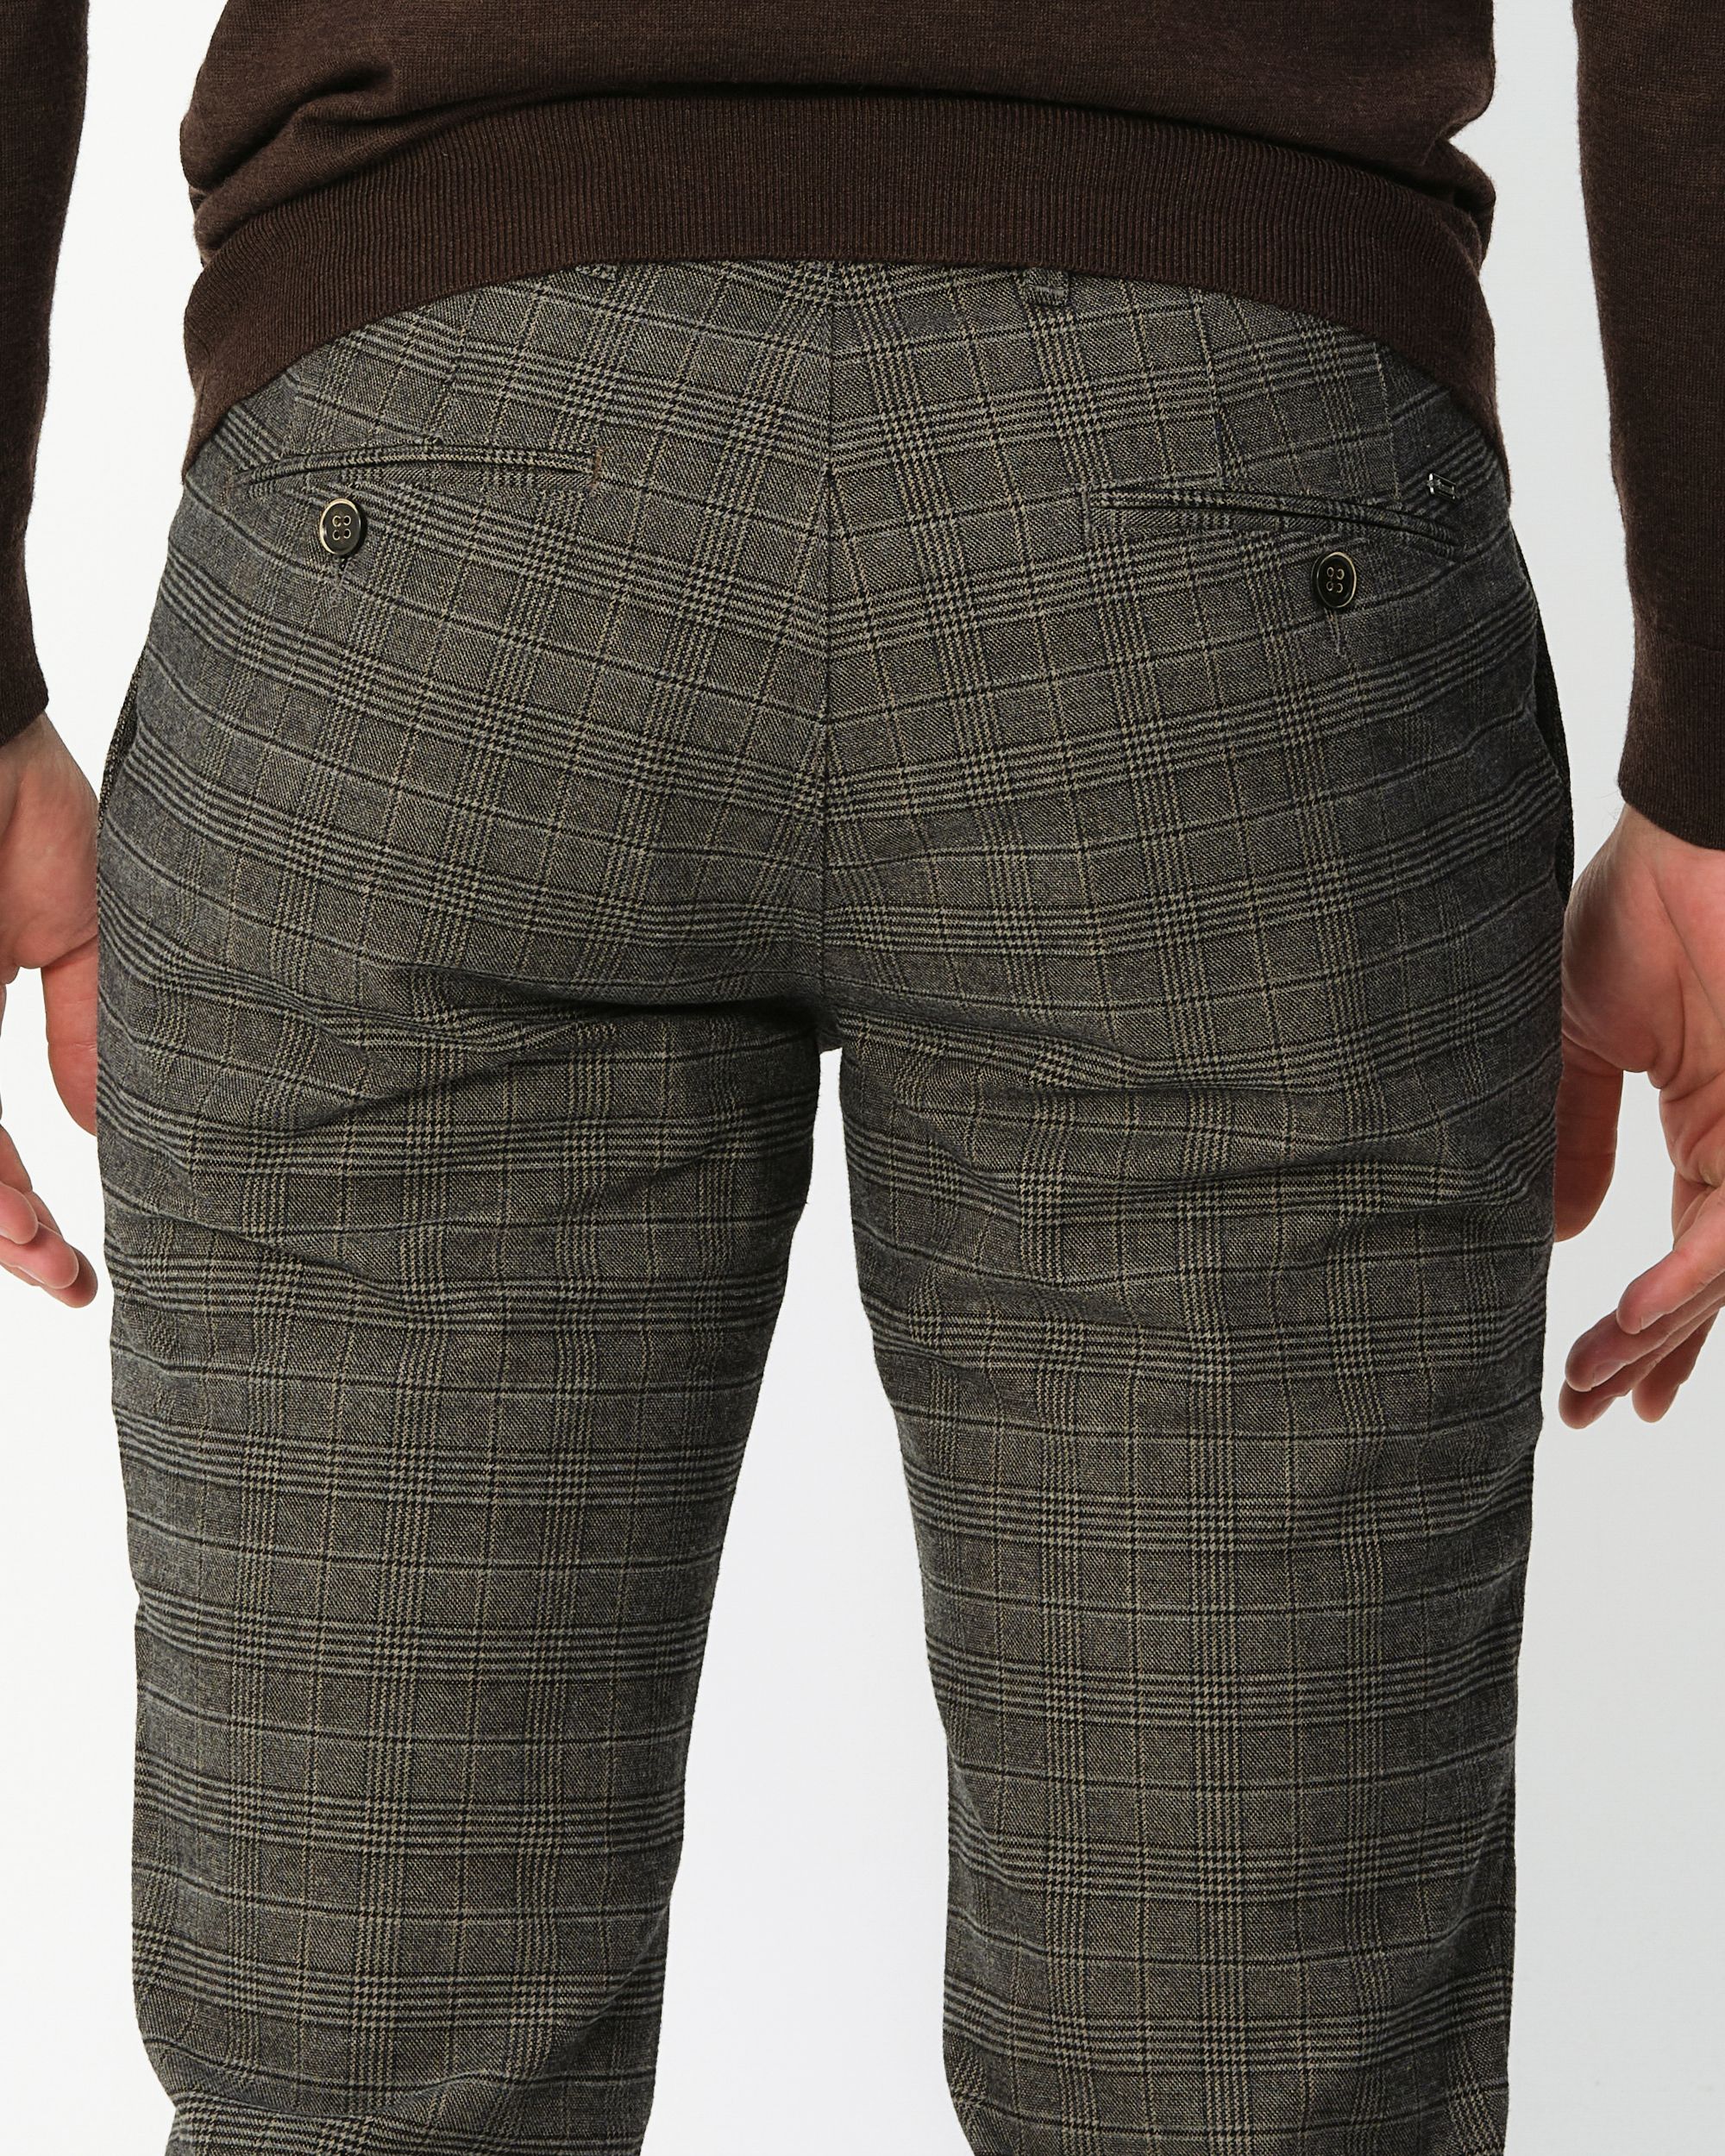 Campbell Classic Chino Bruin grote ruit 085141-003-29/34